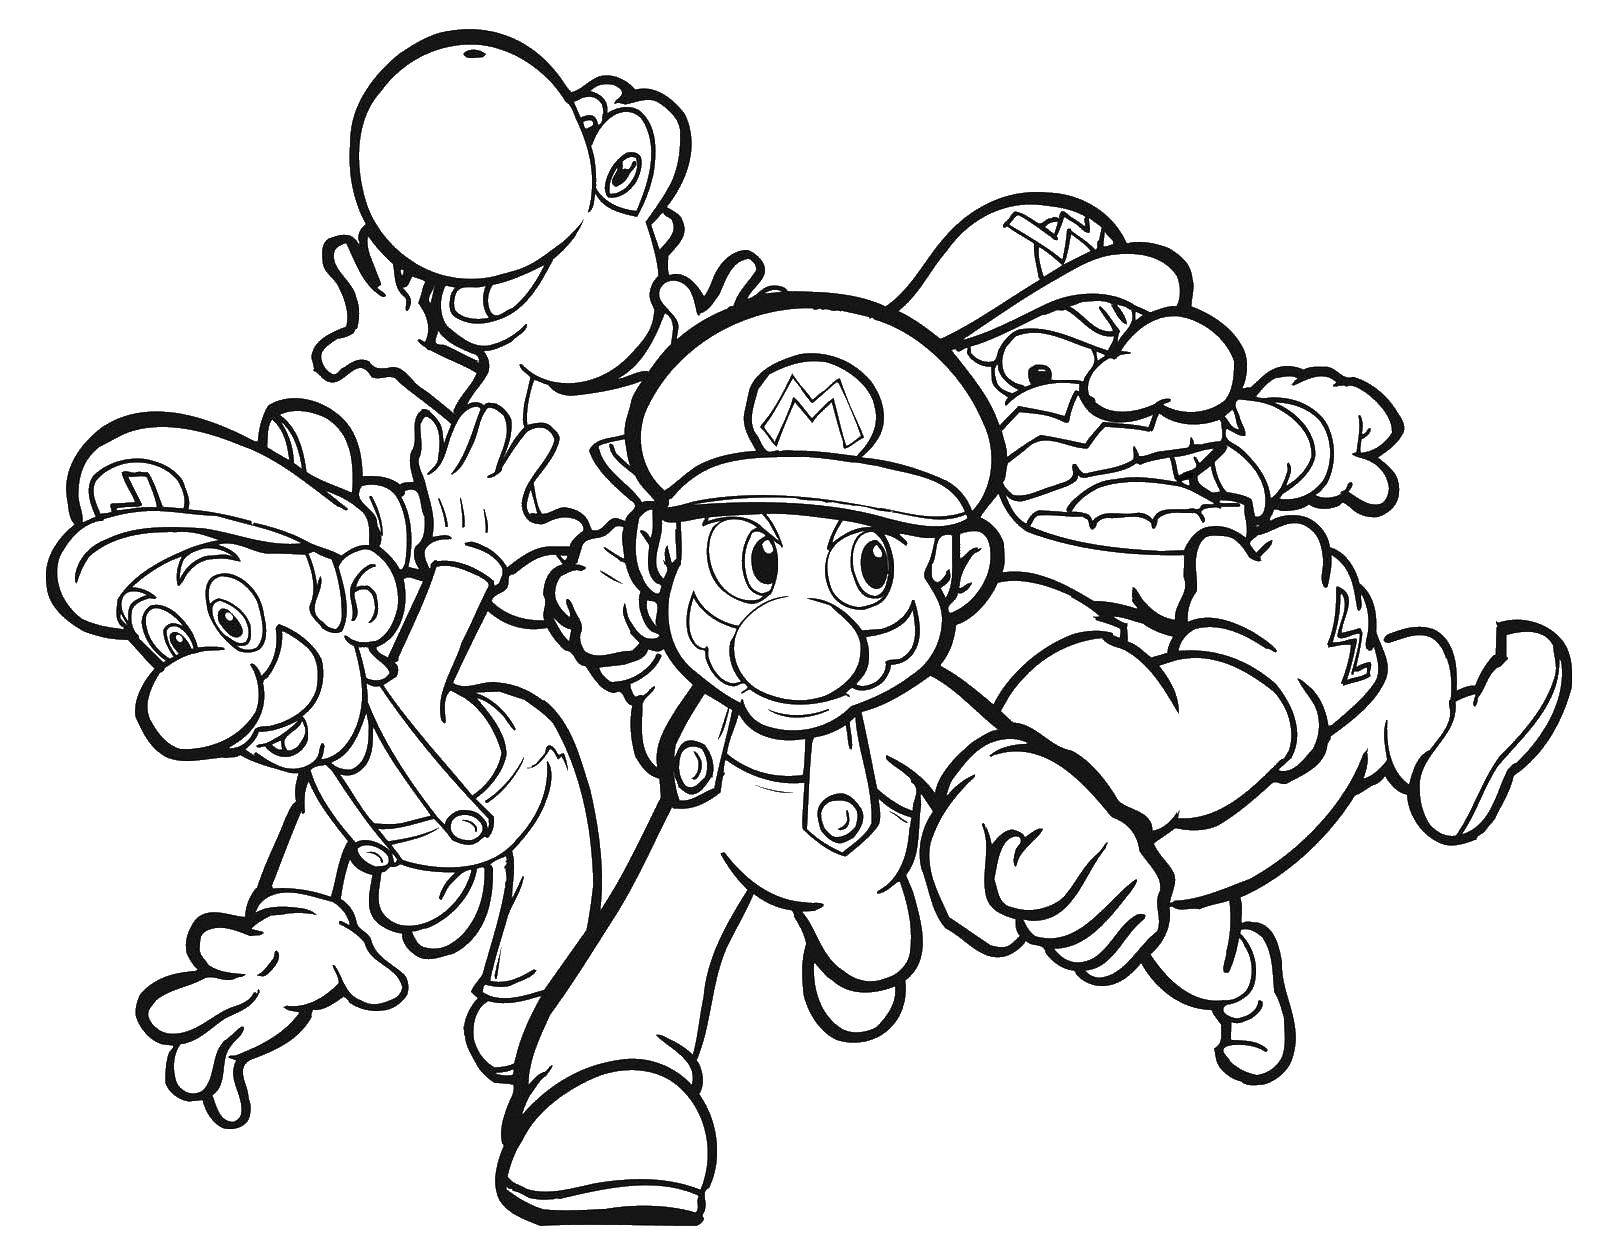 Coloring Mario. Category games. Tags:  games, console game, Mario.